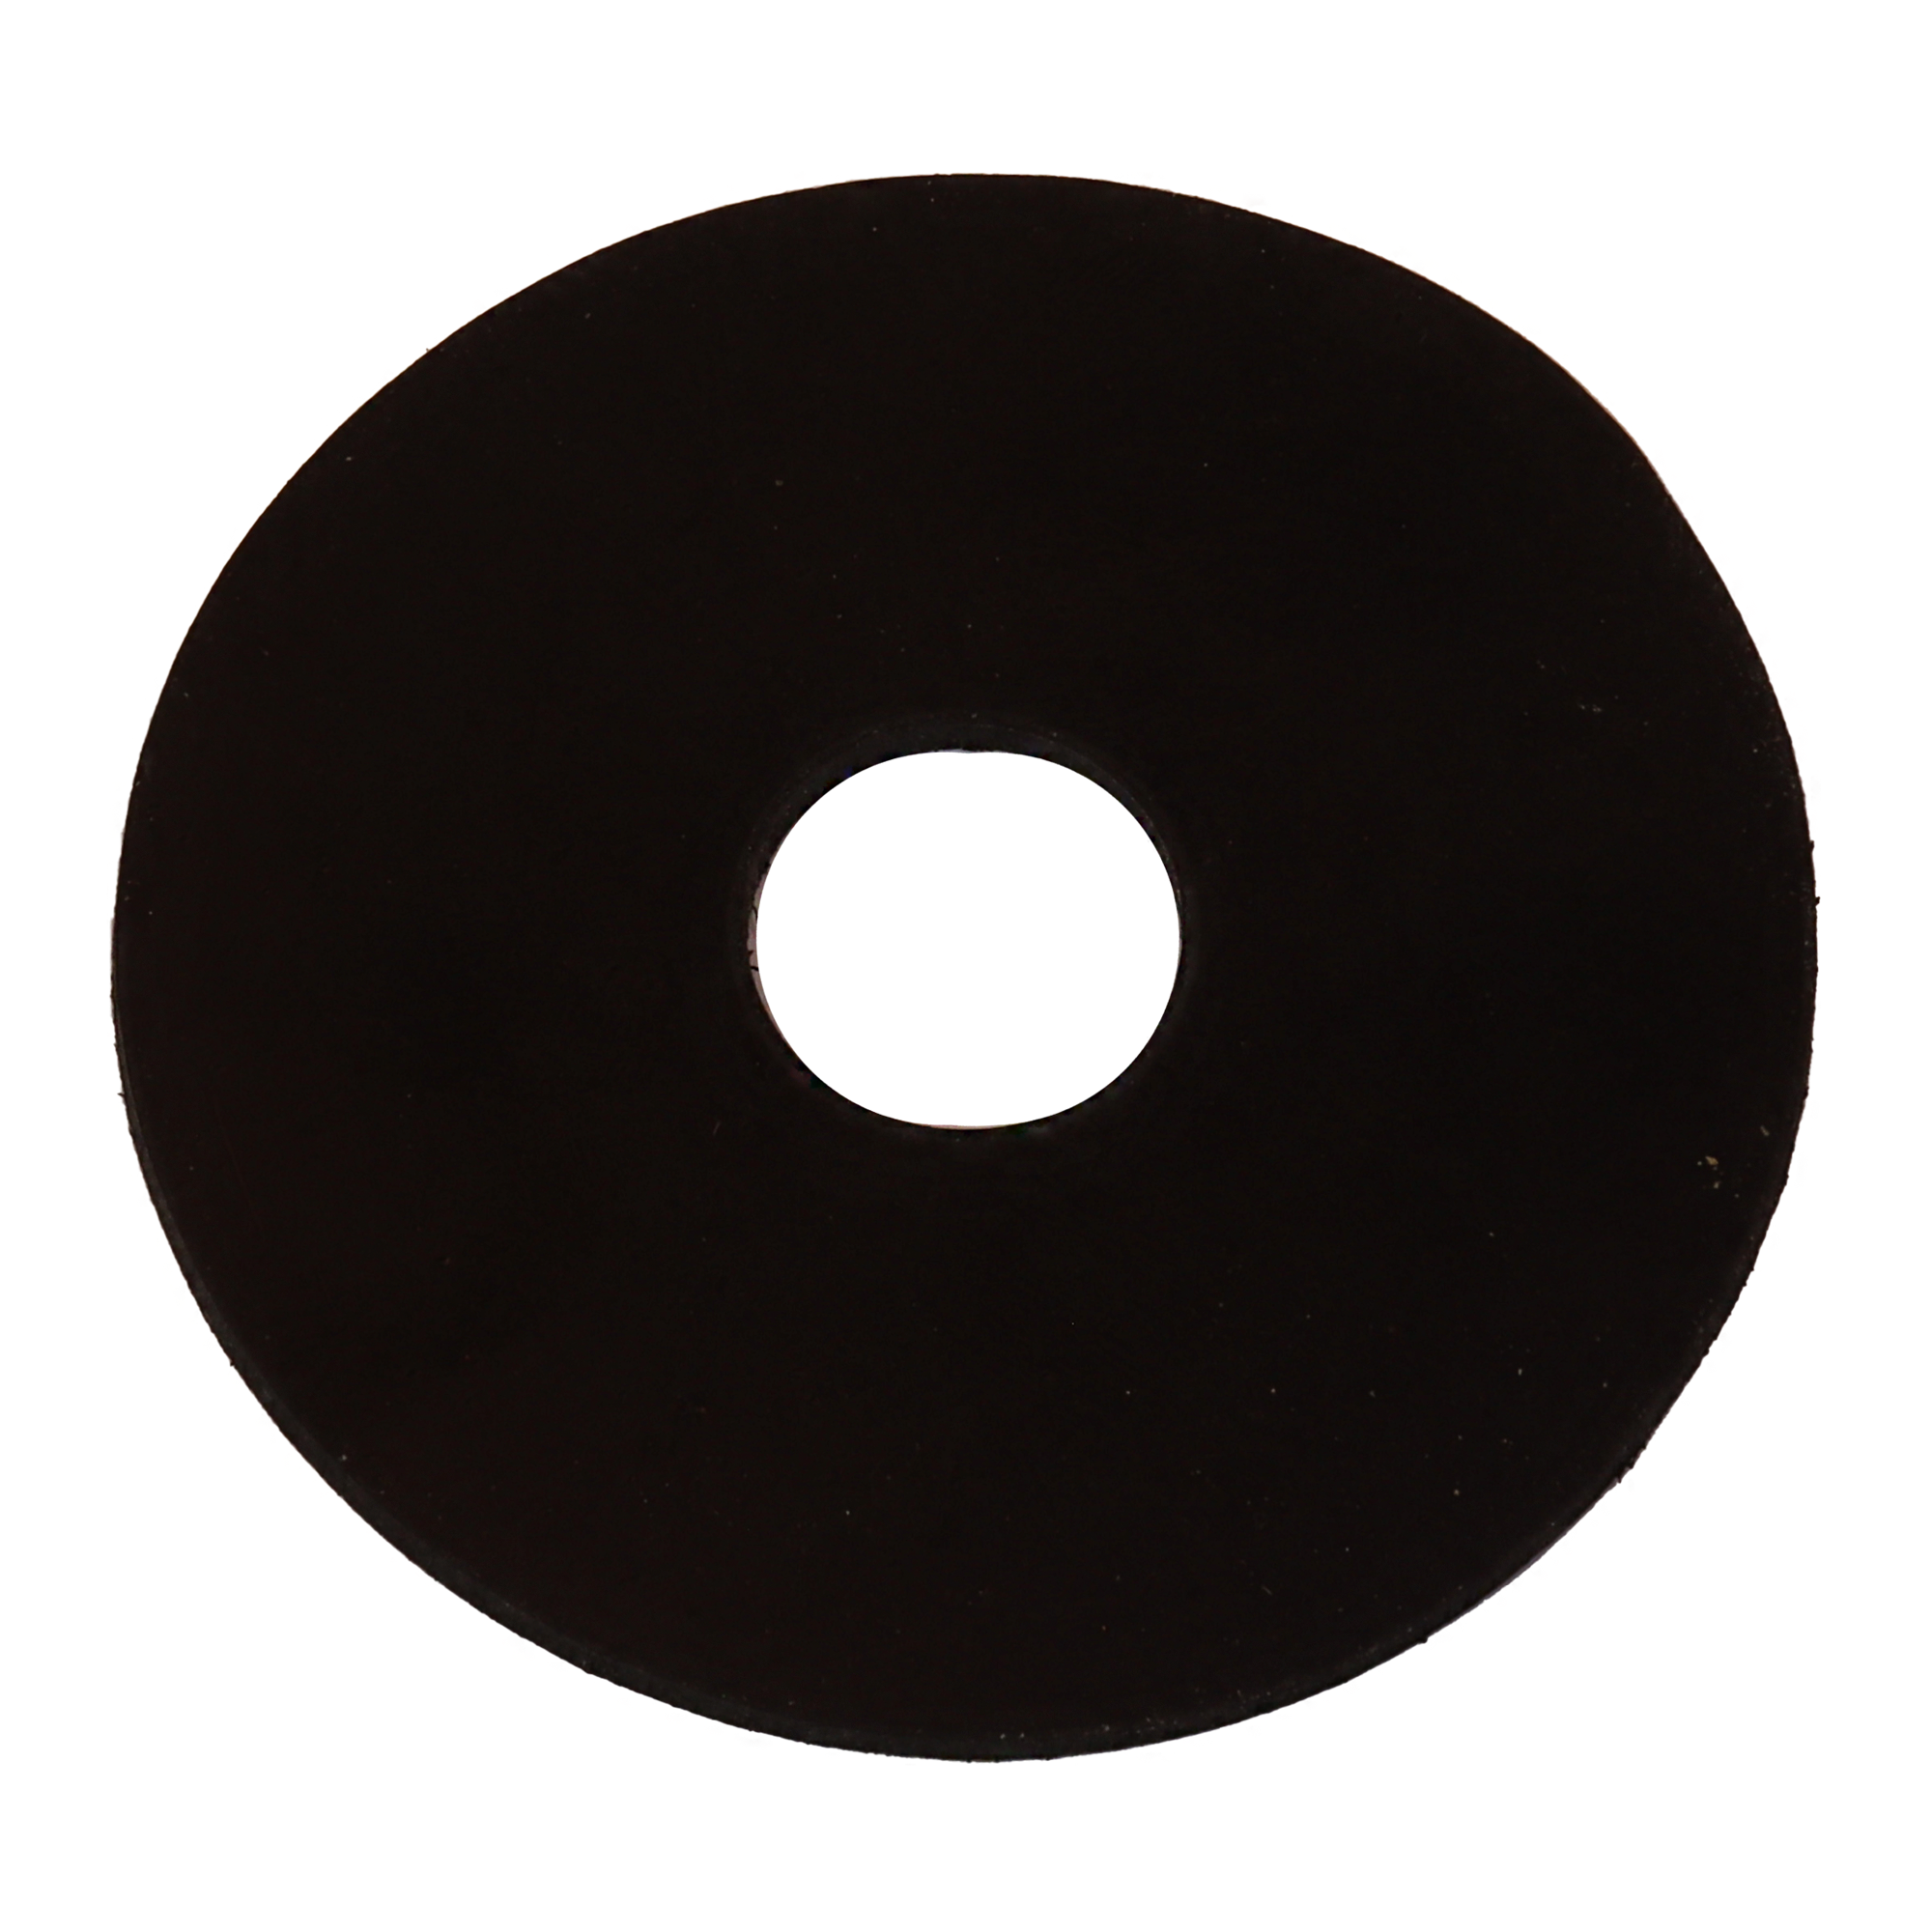 0708b THICK GASKET FOR 1108 & 1118 ADAPTER